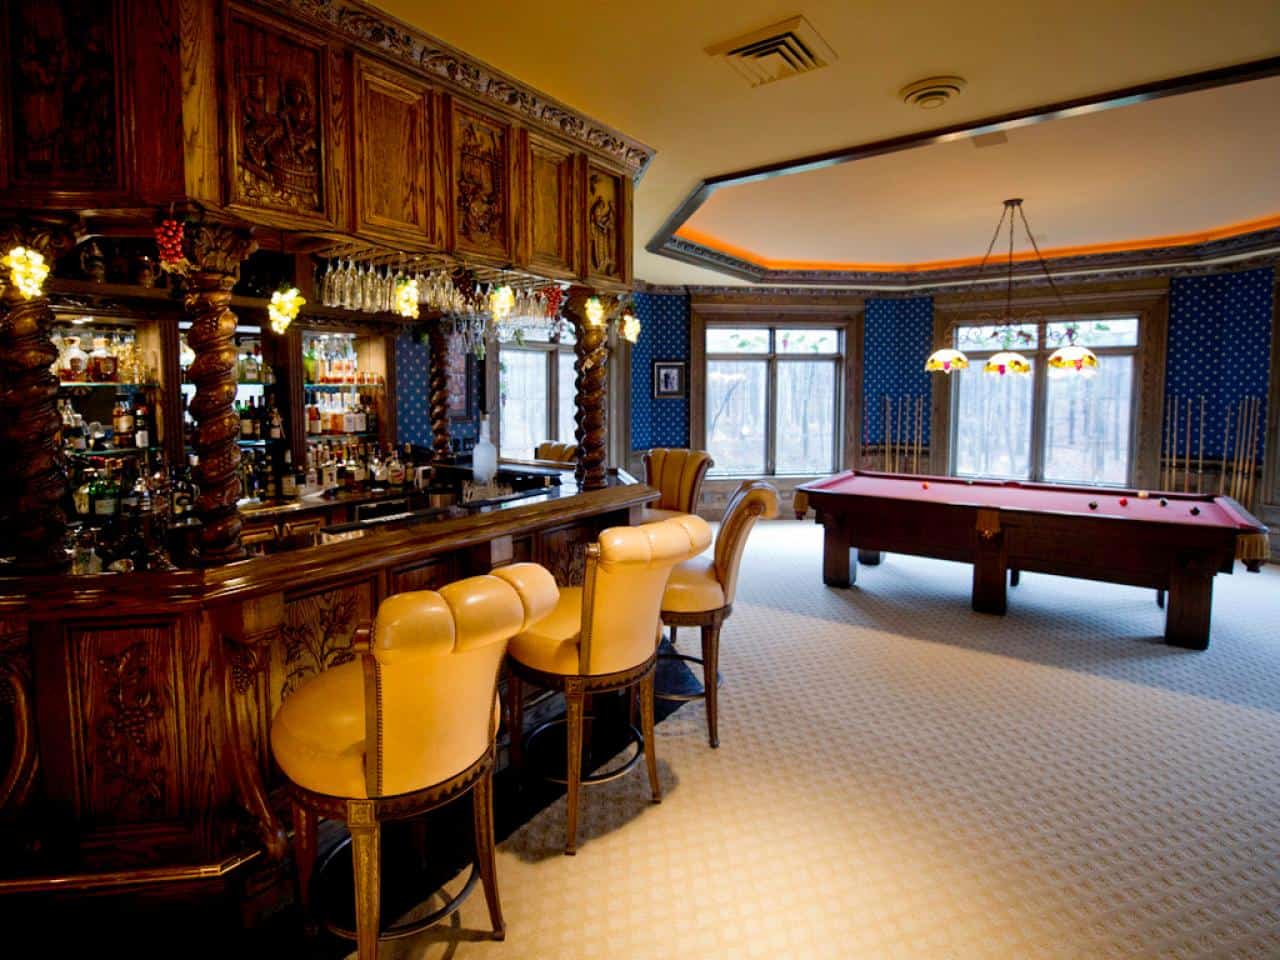 These 15 Basement Bar Ideas Are Perfect For the "Man Cave"